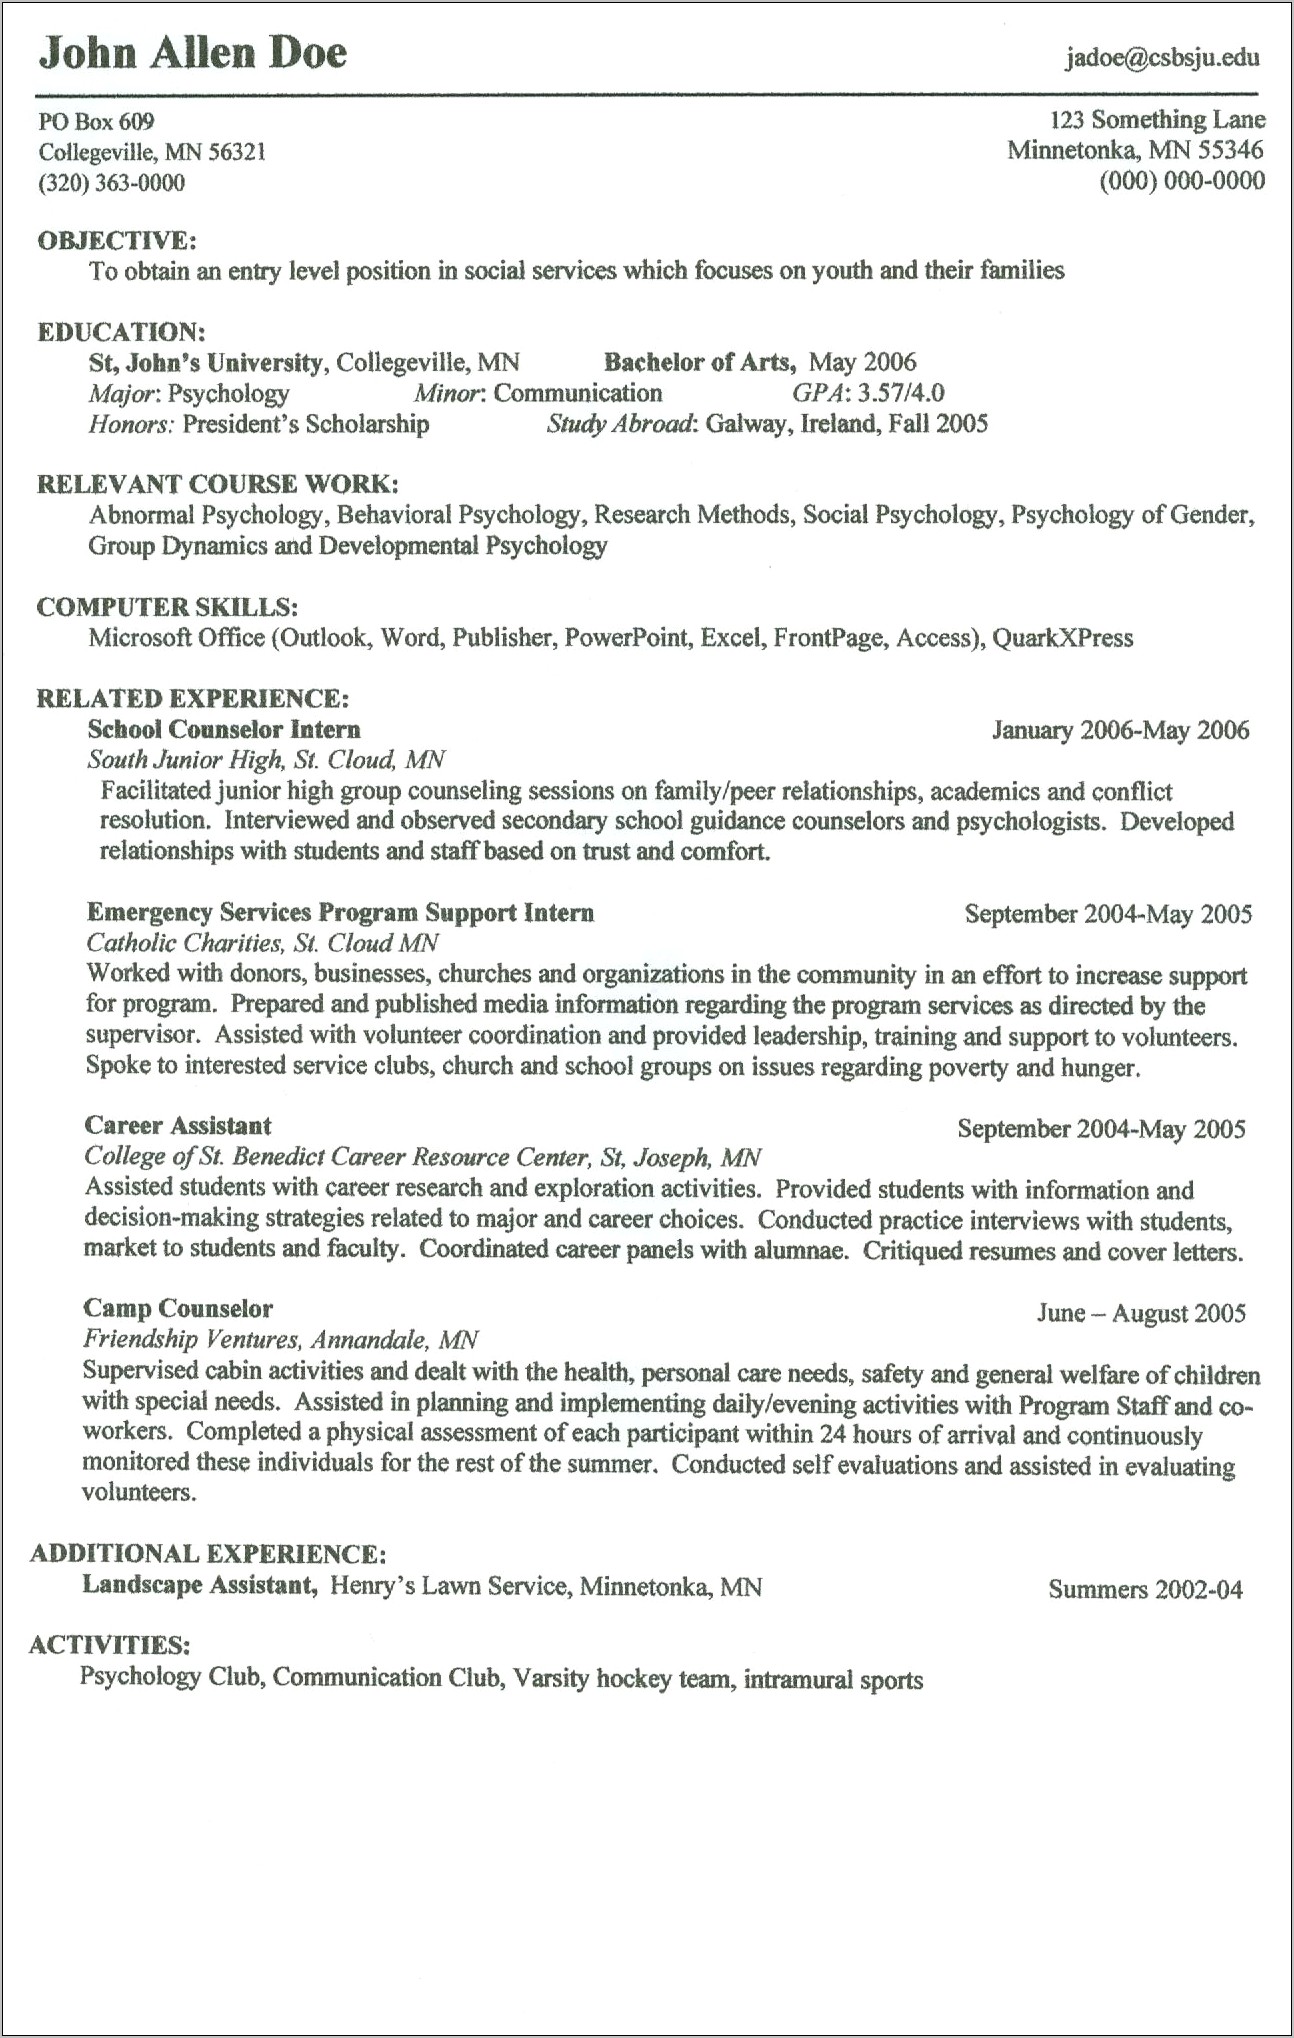 Resume For An On Campus Job